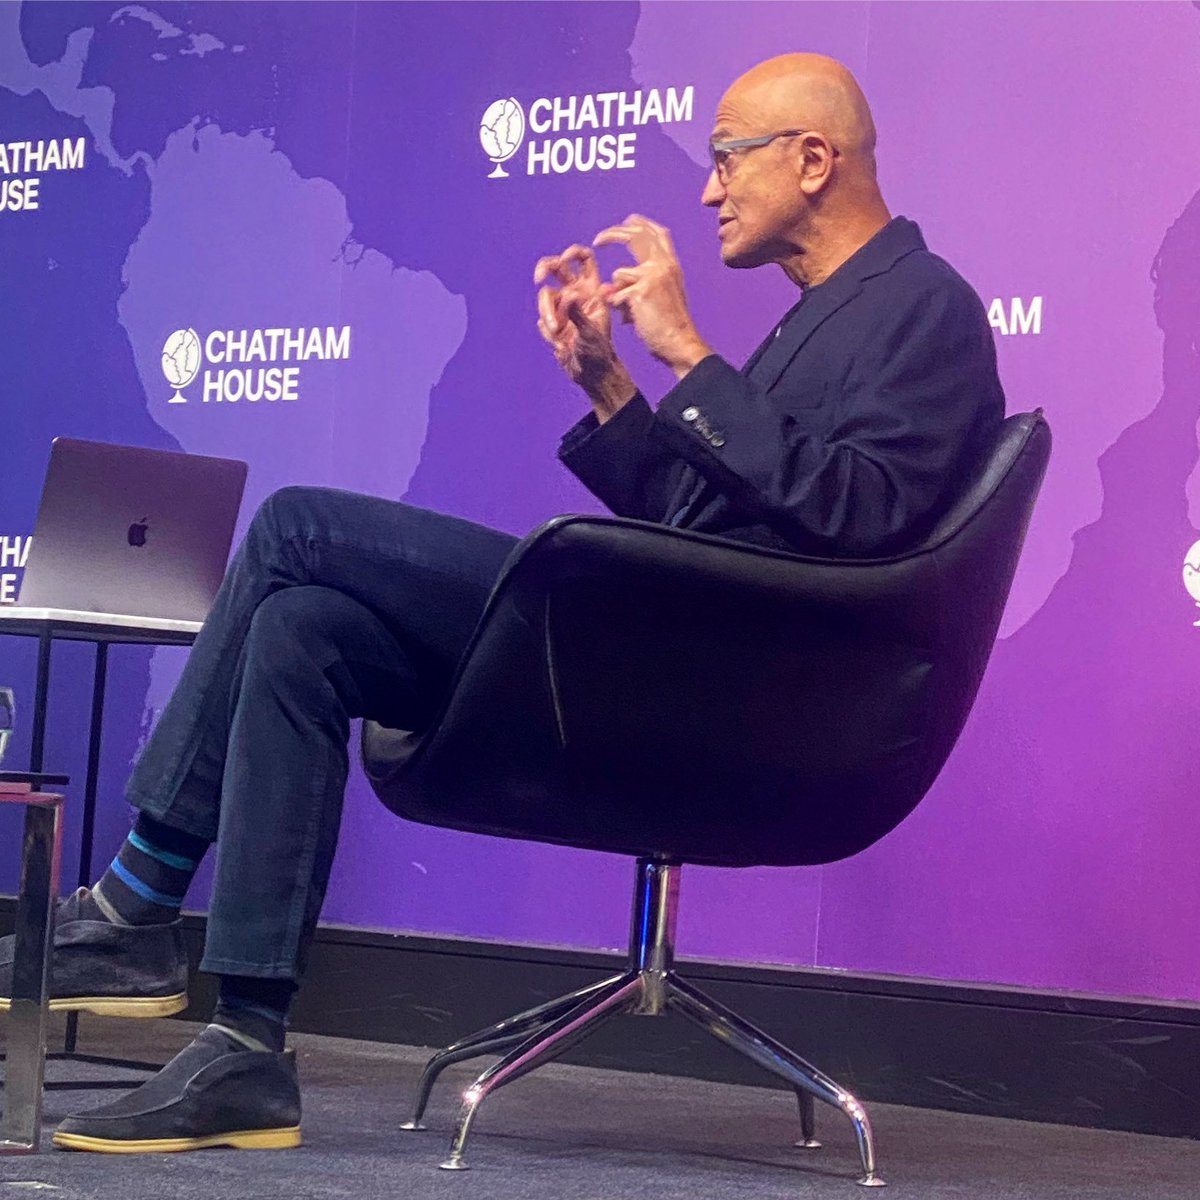 What an extraordinarily good communicator @satyanadella is - explaining the opportunities of #AI Chaired with minimalism (thankfully) by @SimonFraser00 @ChathamHouse #CHevents @Microsoft